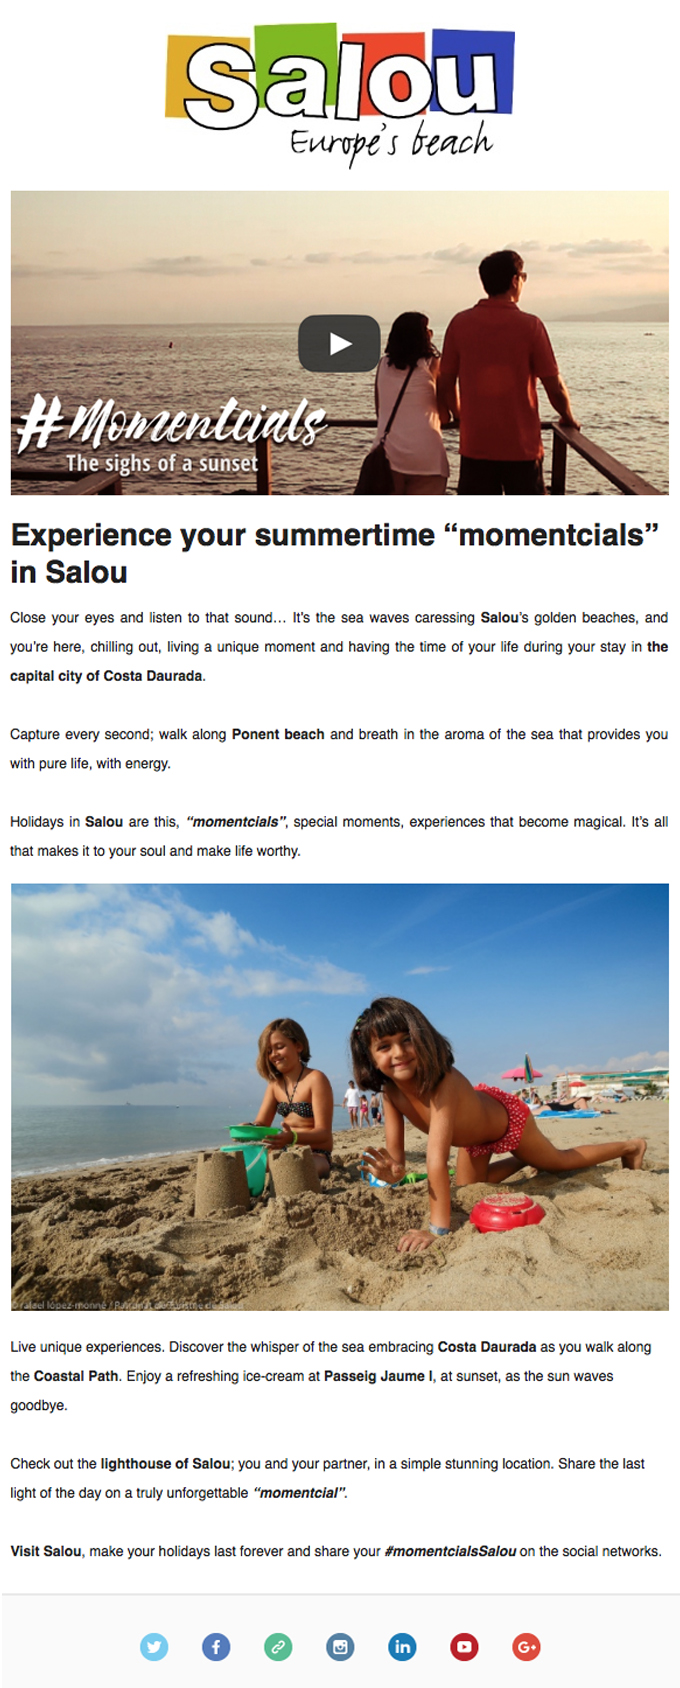 Experience your summertime "momentcials" in Salou